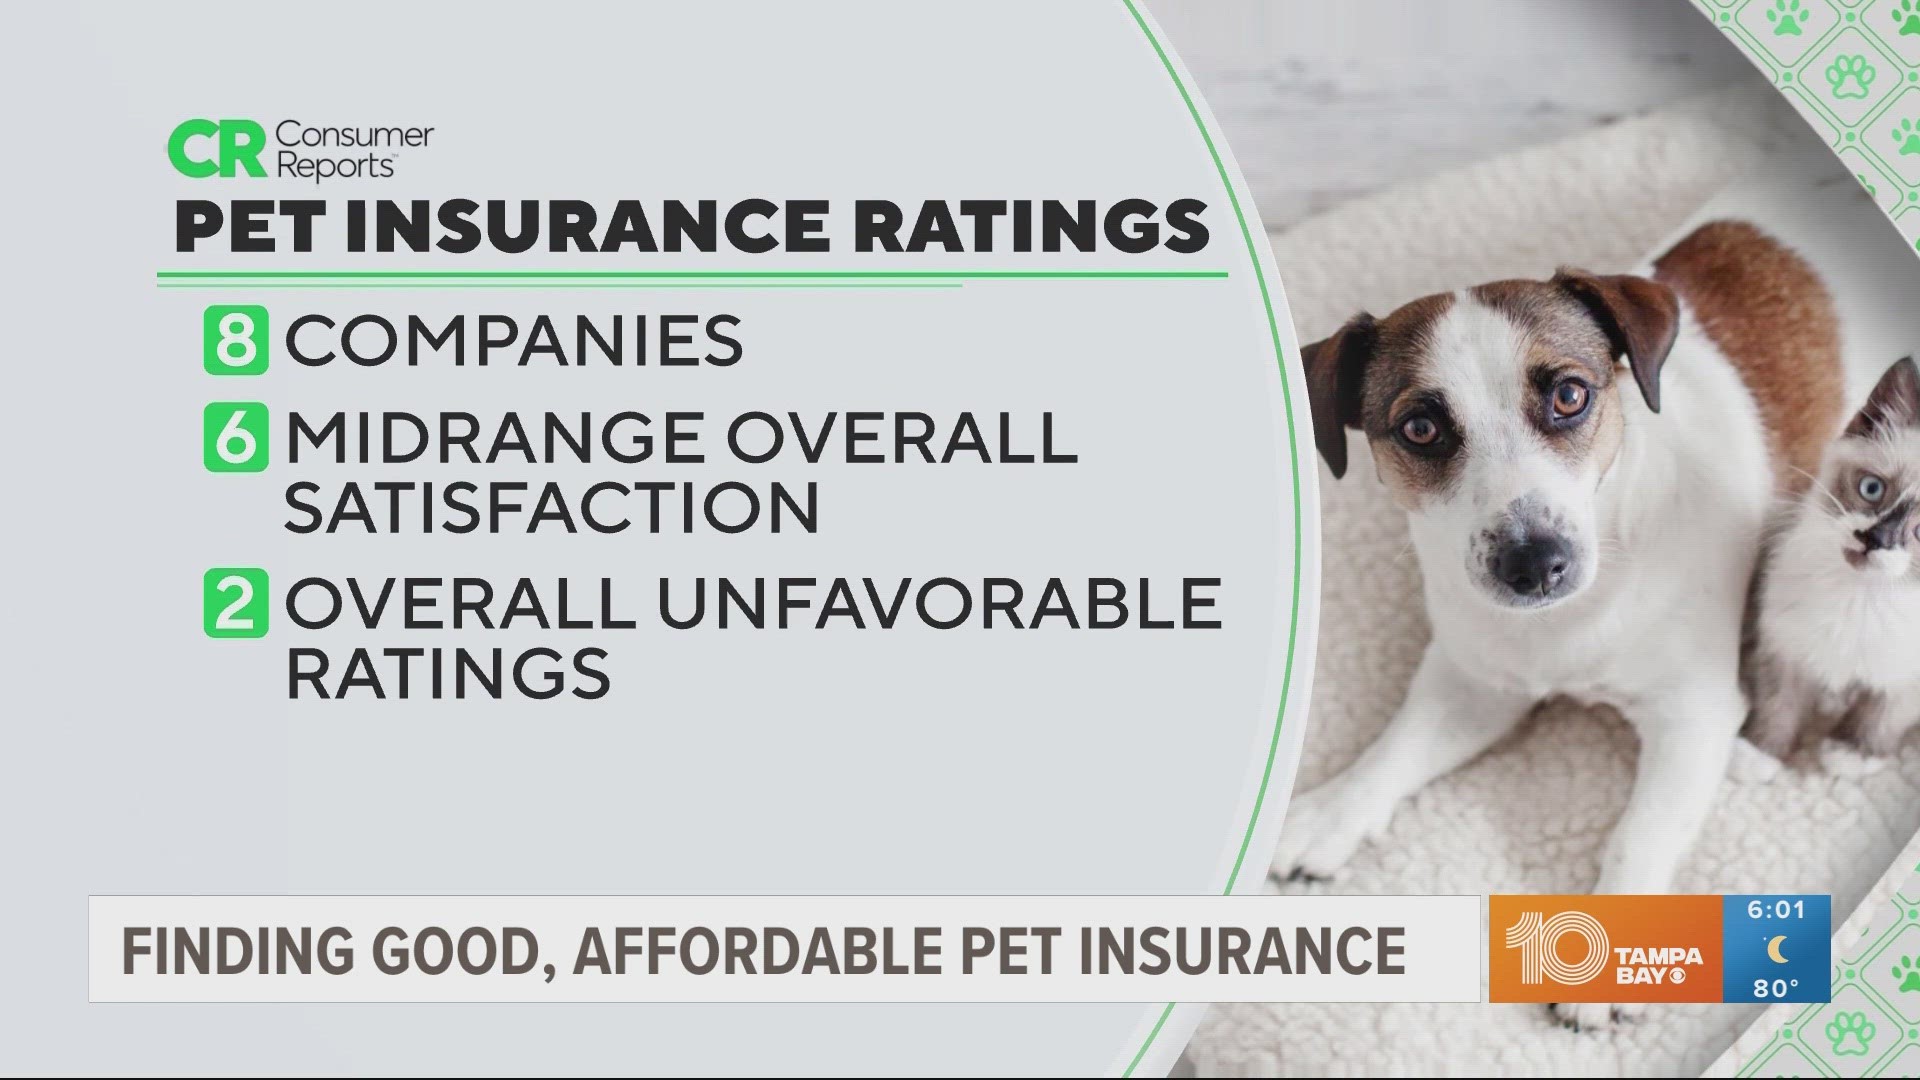 There are different options for pet owners to save money on pet insurance.